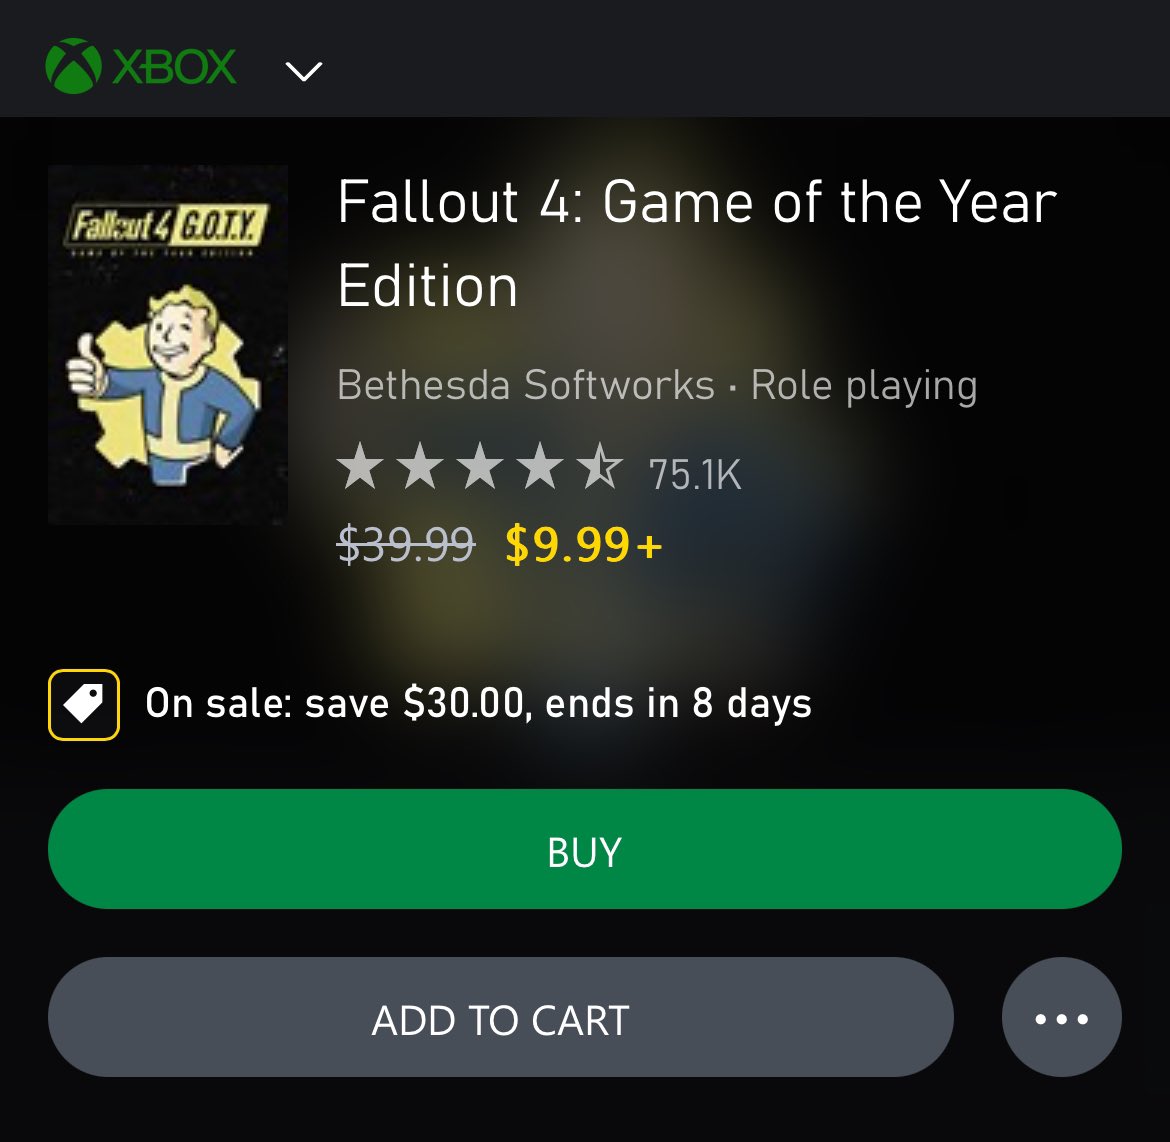 PSA: With the new update to Fallout 4 dropping on April 25th, the GOTY edition is currently $10 till April 19th. Worth it even if you have GamePass with the game included.